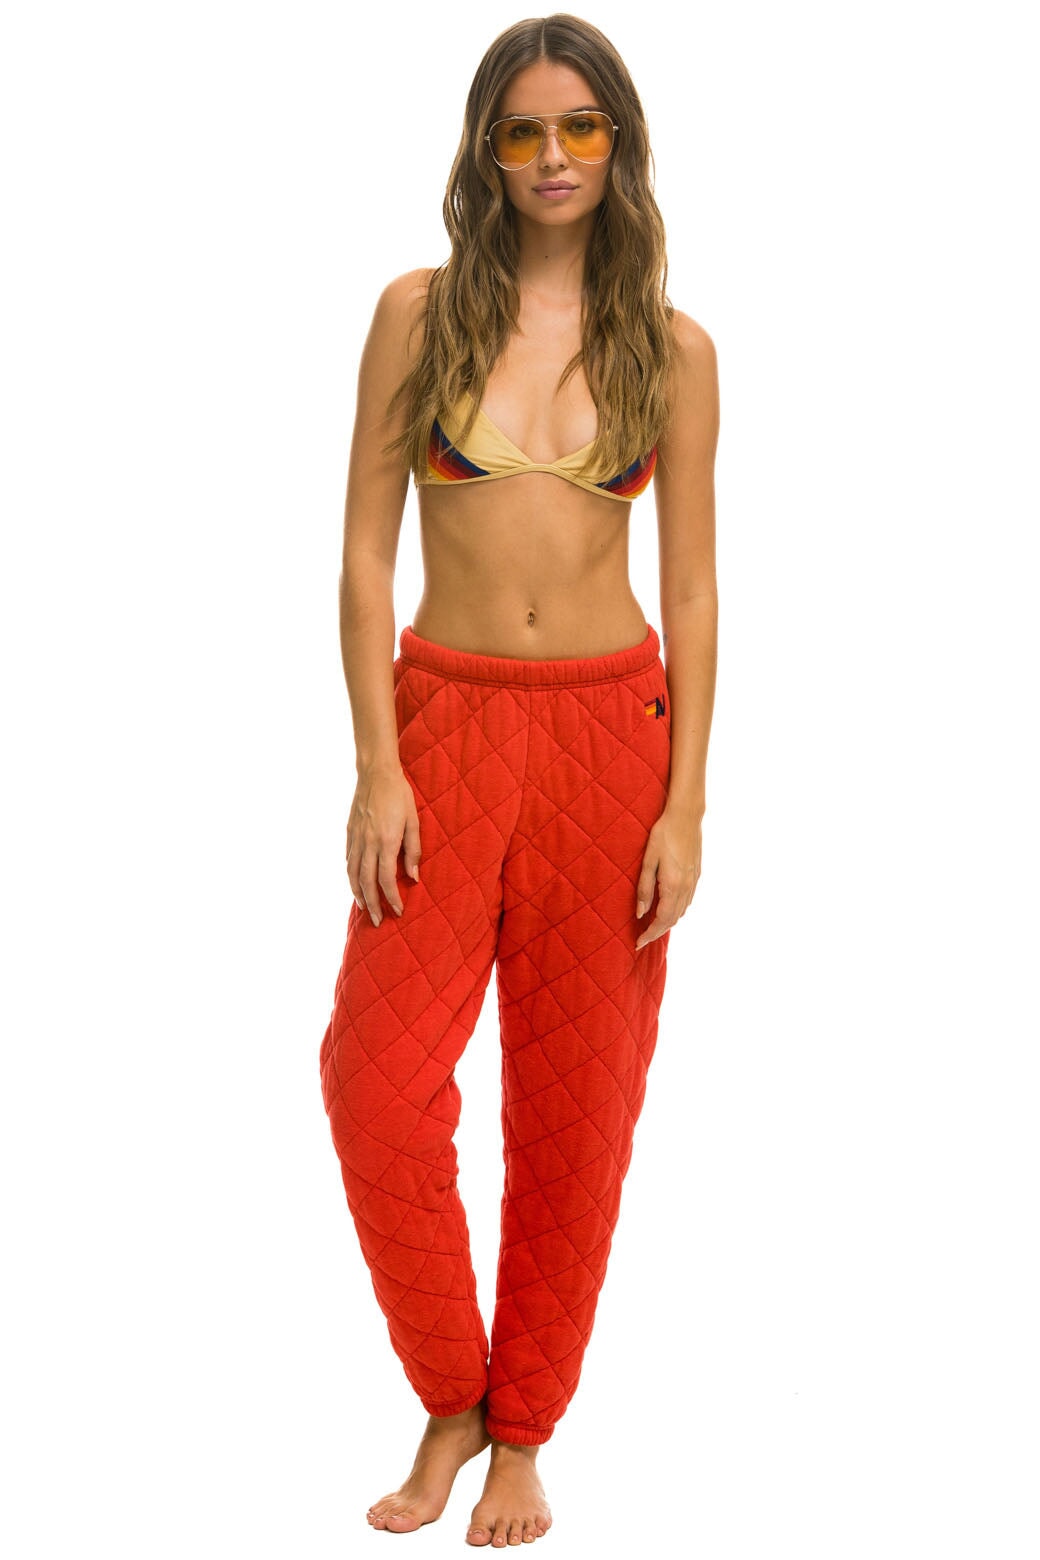 WOMEN'S QUILTED SWEATPANTS - RED Womens Sweatpants Aviator Nation 